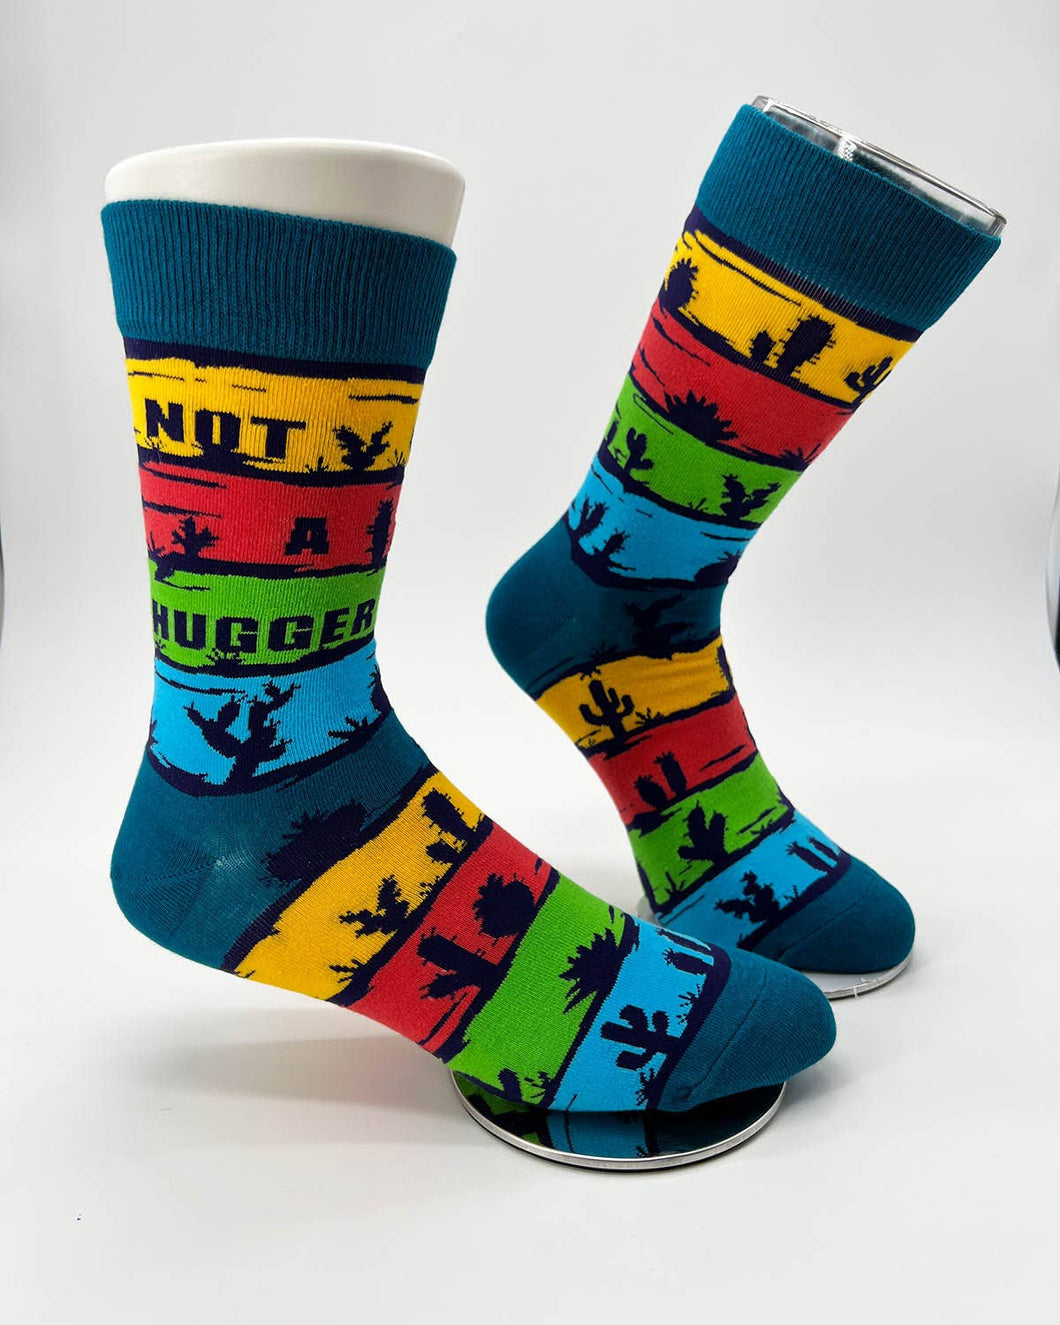 Not a Hugger Men's Crew Socks Featuring Cactuses